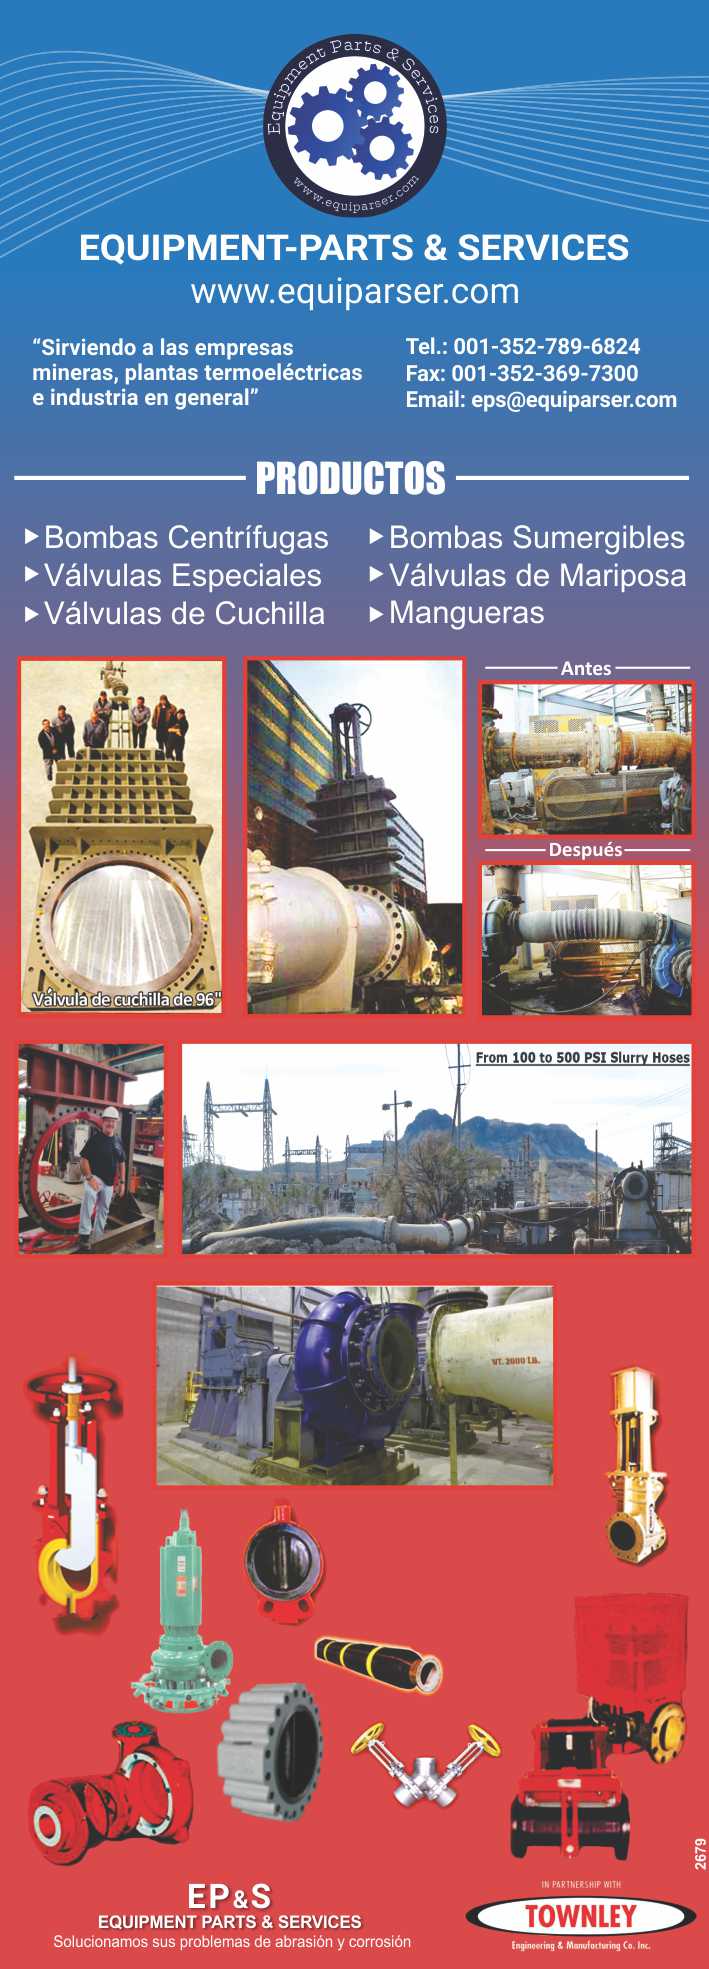 Serving mining companies, thermoelectric plants and industry in general. We solve your abrasion and corrosion problems.